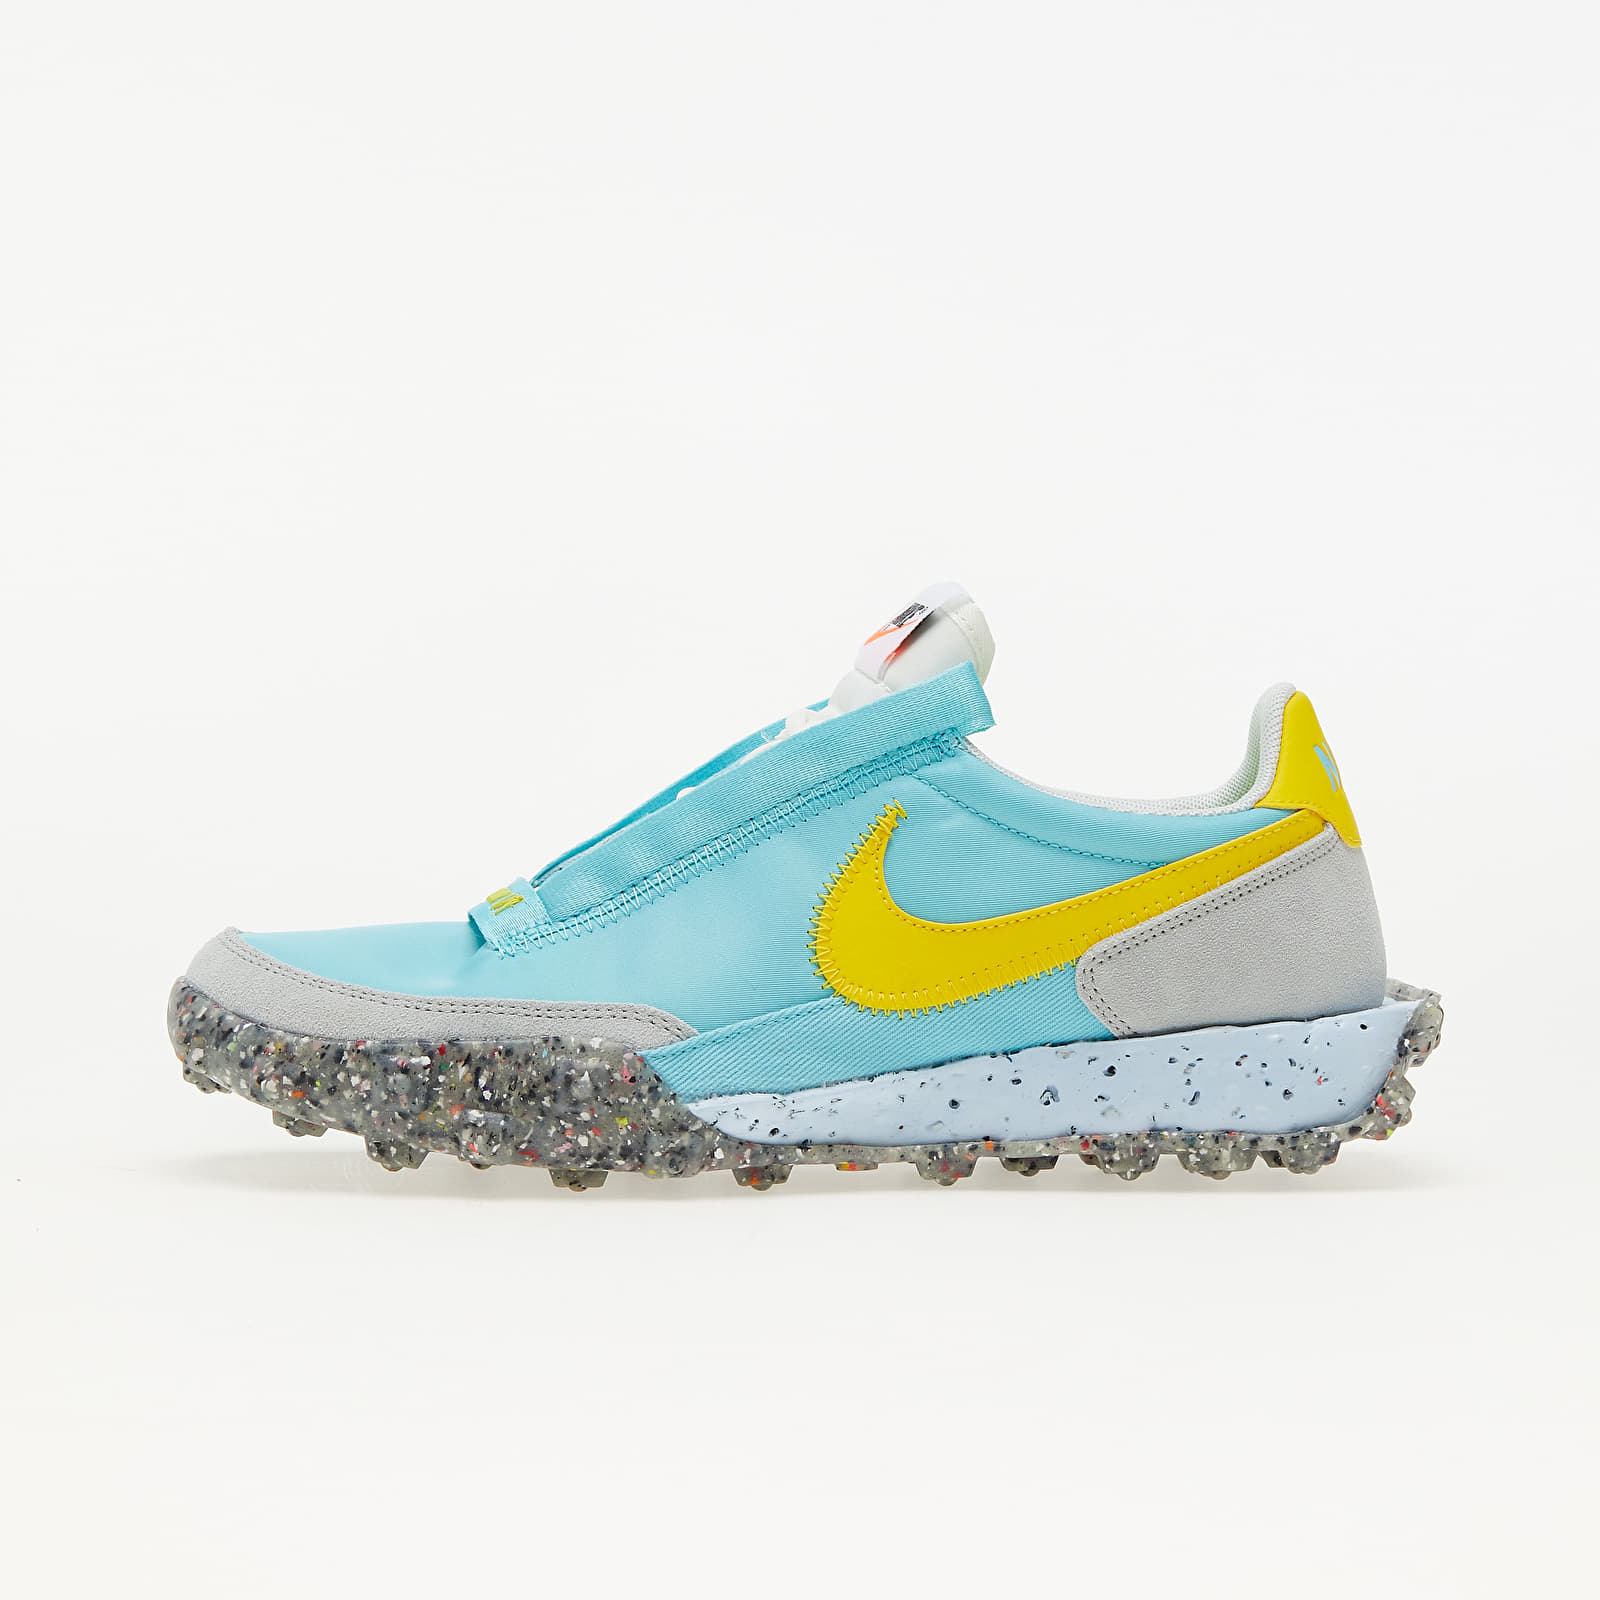 Dámske topánky a tenisky Nike W Waffle Racer Crater Bleached Aqua/ Speed Yellow-Sail